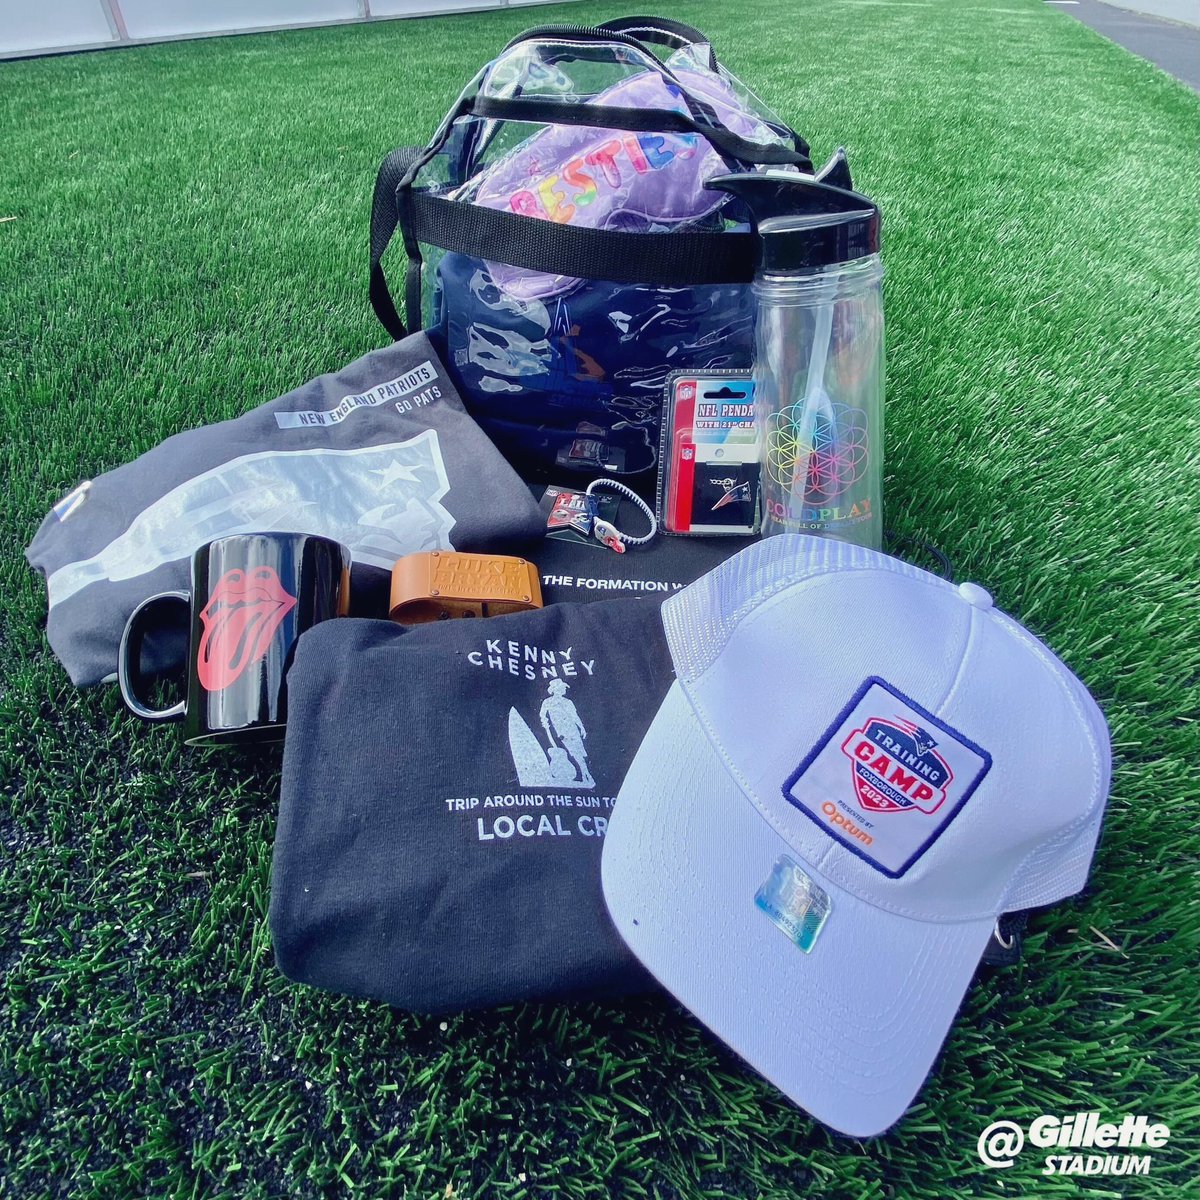 Social squad spring cleaning continues! RT and follow us for your chance to win: - Coldplay water bottle - Patriots tshirt - Karol G swag - Rolling Stones mug - Concert cups - Patriots bracelet - Throwback #PatsCamp hat - and more!